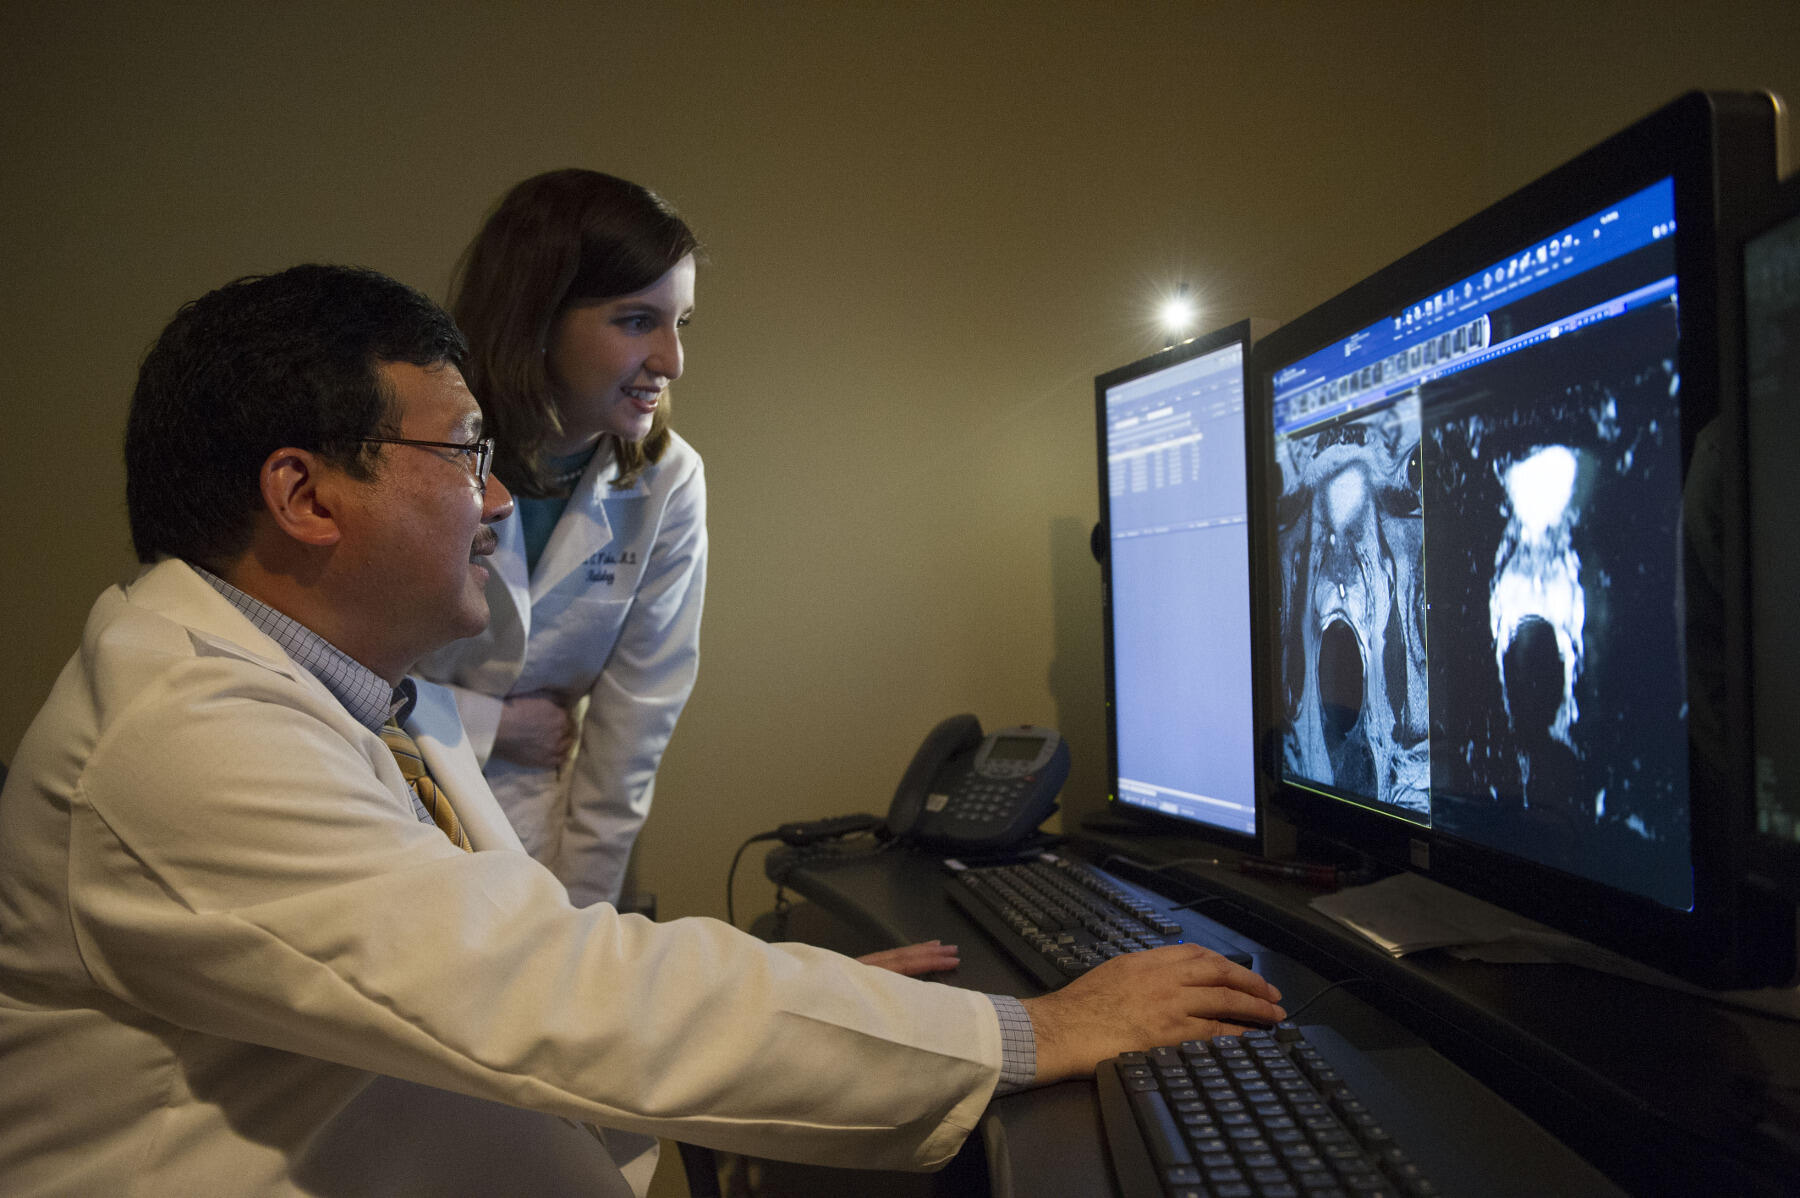 Learning to accurately read prostate MRI sequences takes years to do well. Yu’s team, including Sarah Winks, M.D., have more than an 85 percent success rate at diagnosing prostate cancer using MR imaging.
